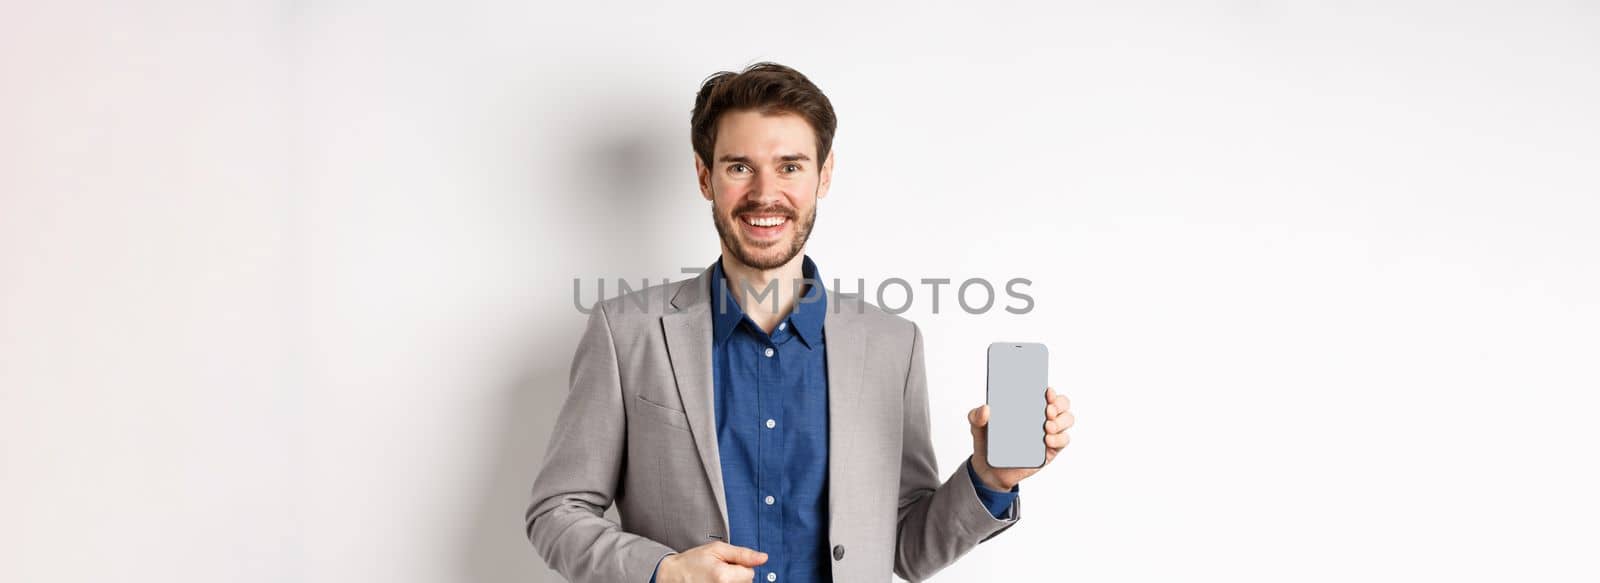 Handsome smiling salesman in suit showing empty smartphone screen, demonstrate an app, standing on white background.